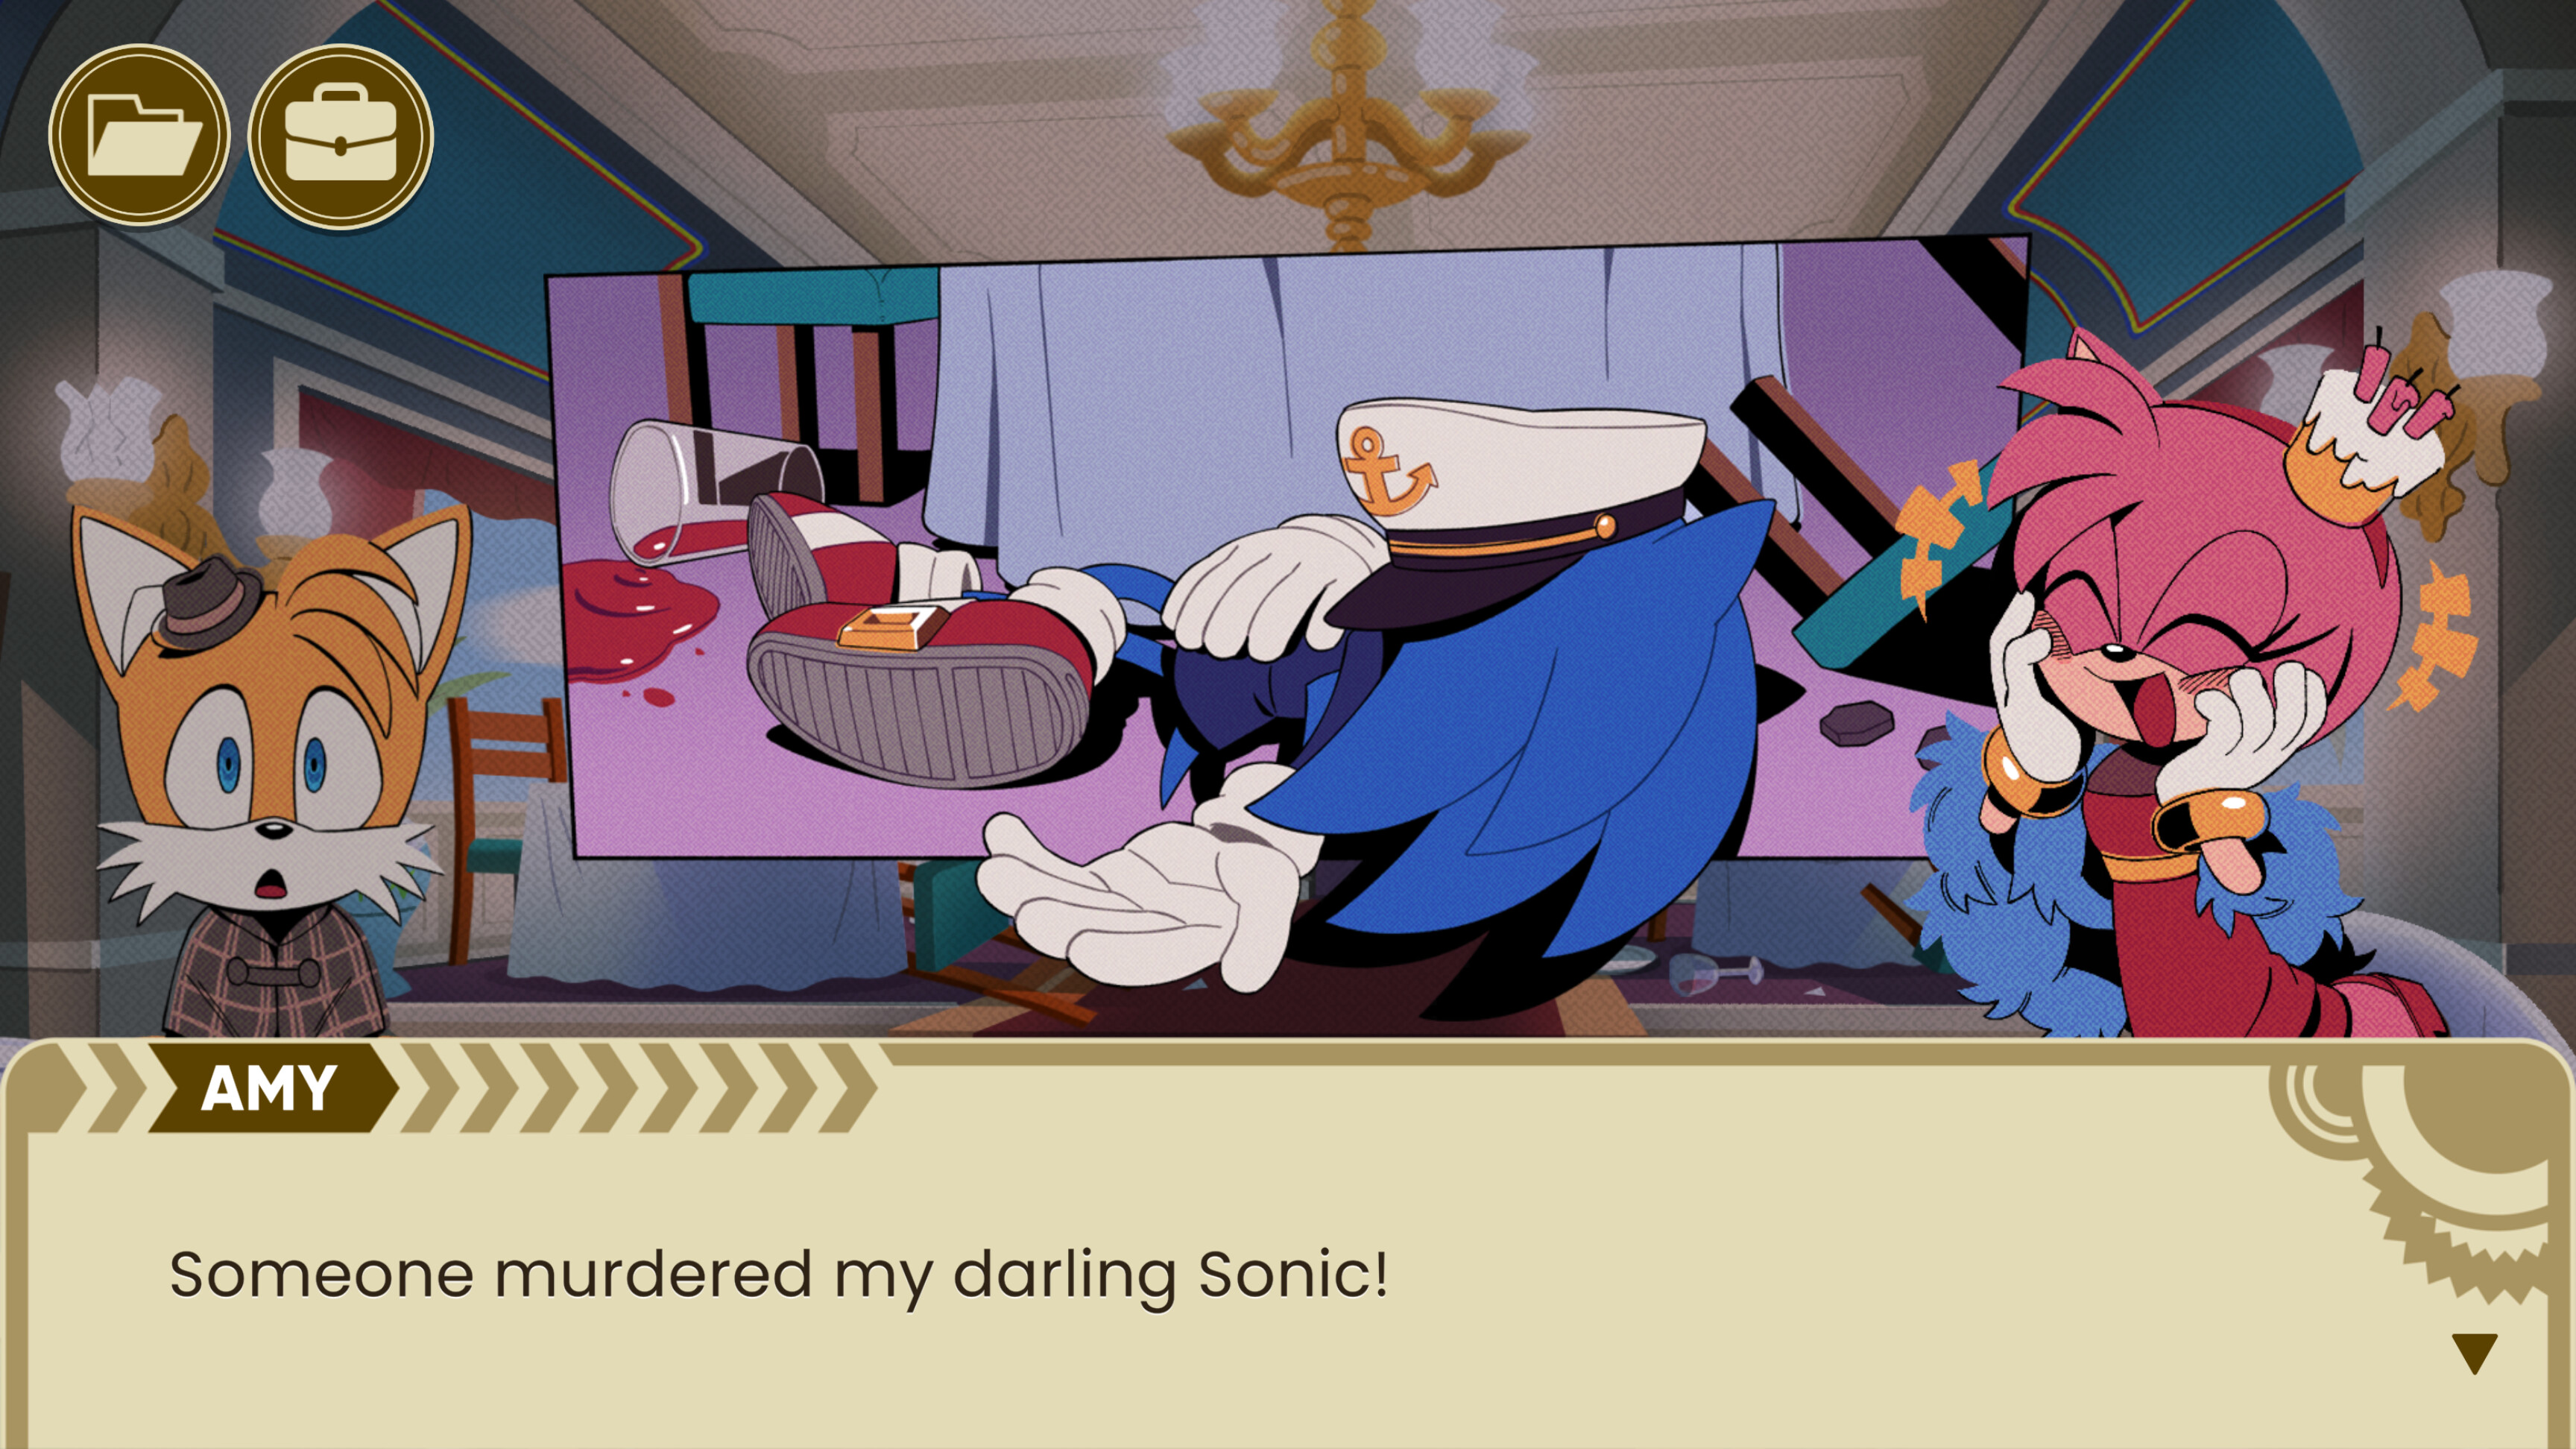 The Murder of Sonic the Hedgehog Is a Free April Fools' Day Game